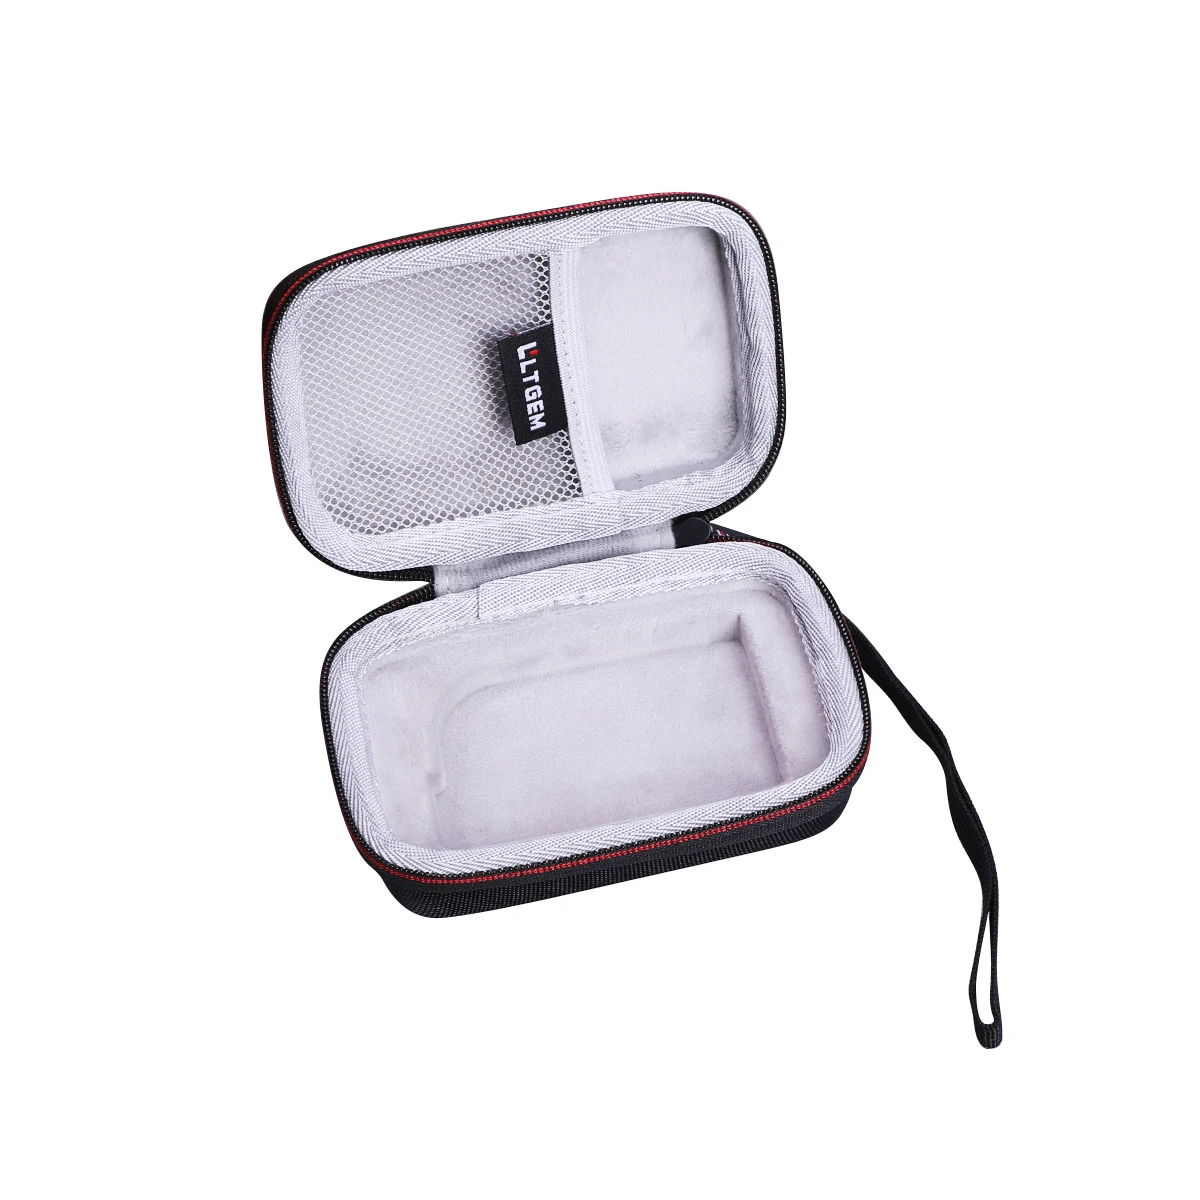  for carson microbrite plus 60x 120x led lighted pocket microscope carrying storage bag thumb200